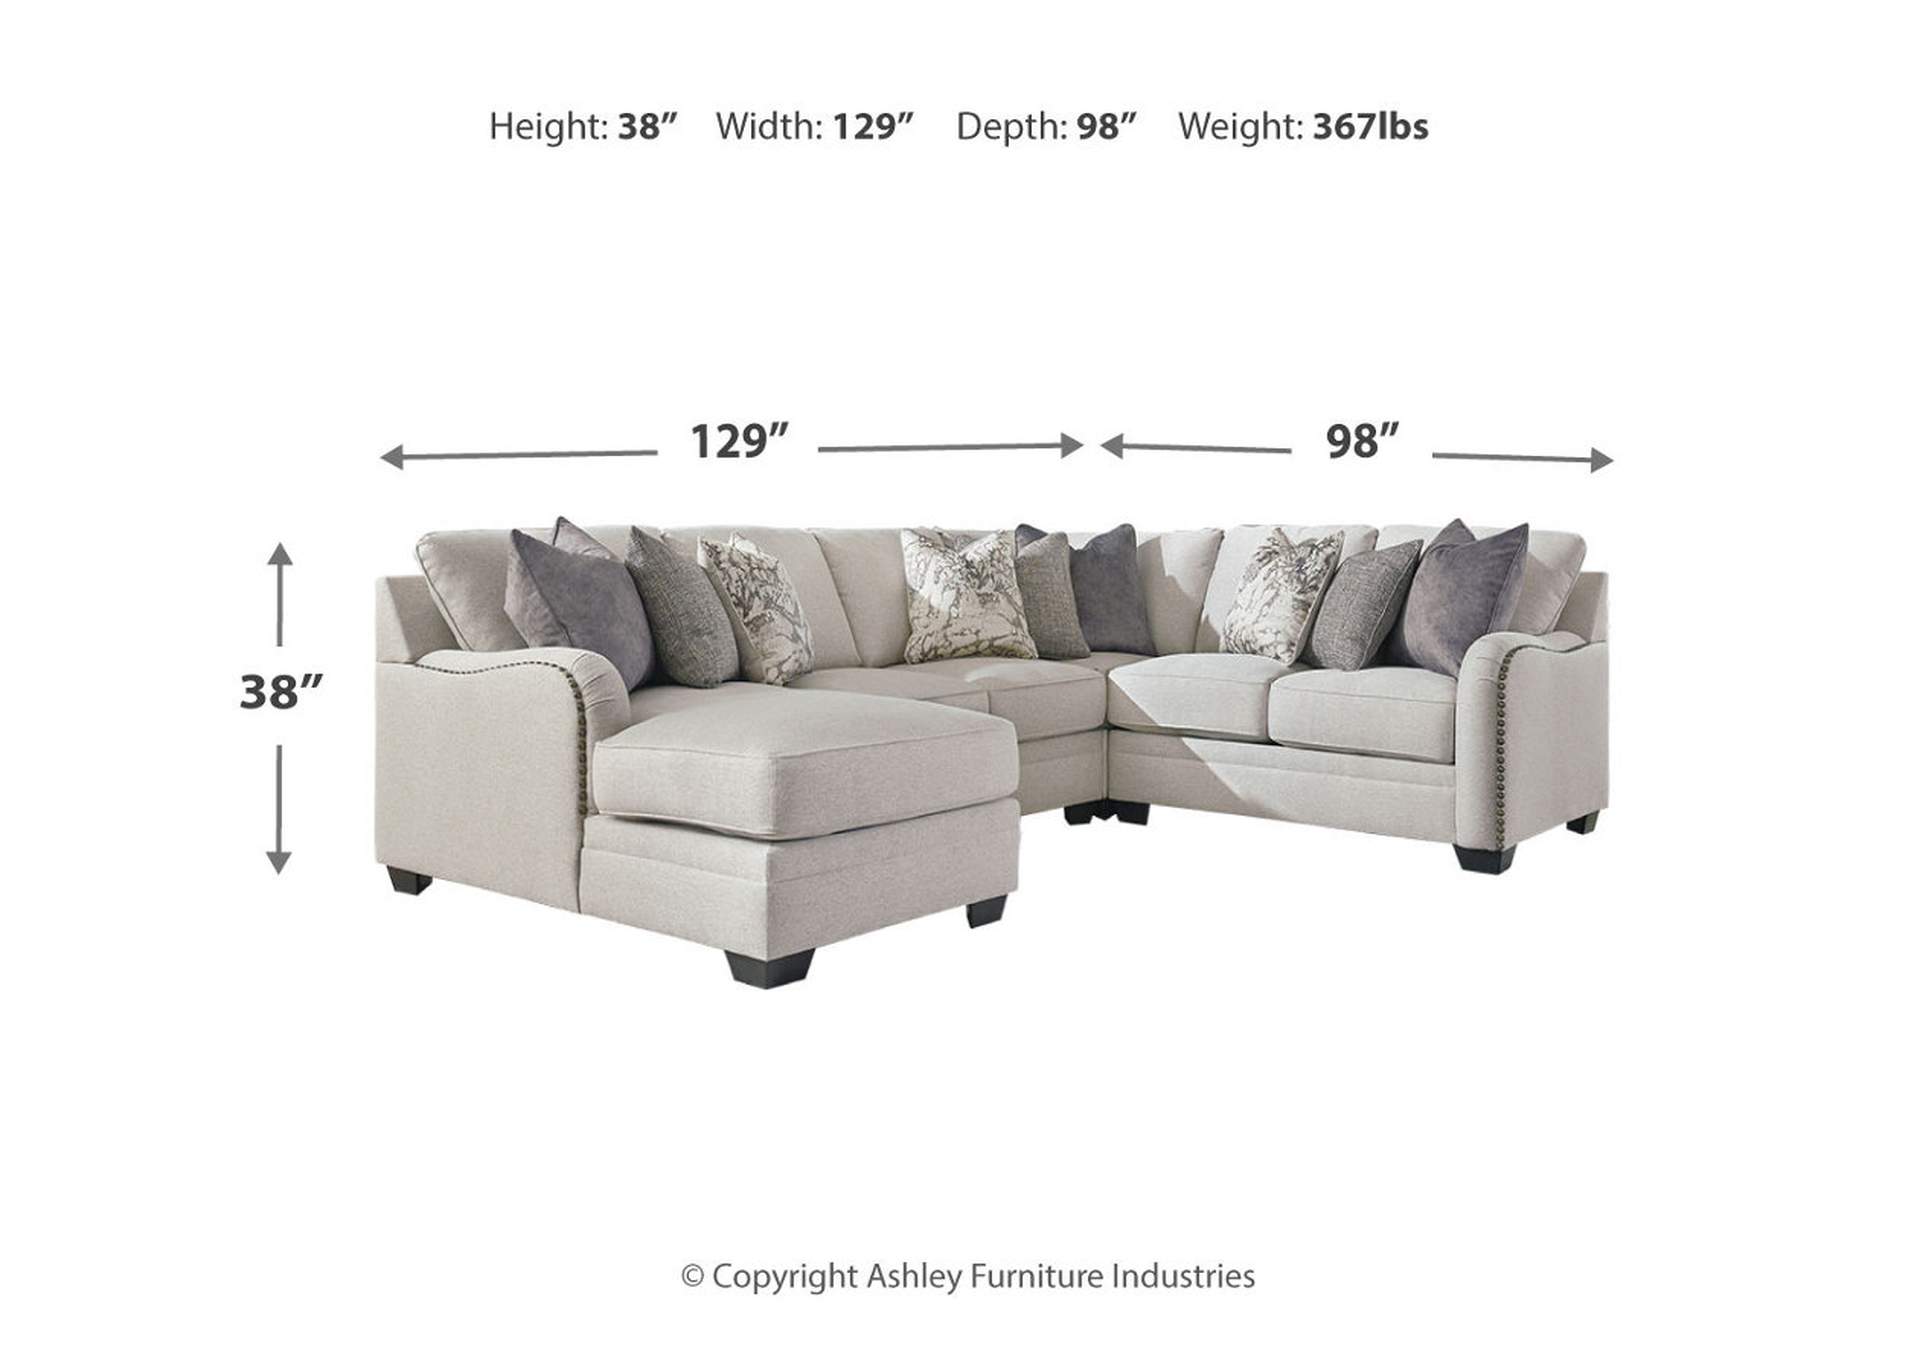 Dellara 4-Piece Sectional with Ottoman,Benchcraft